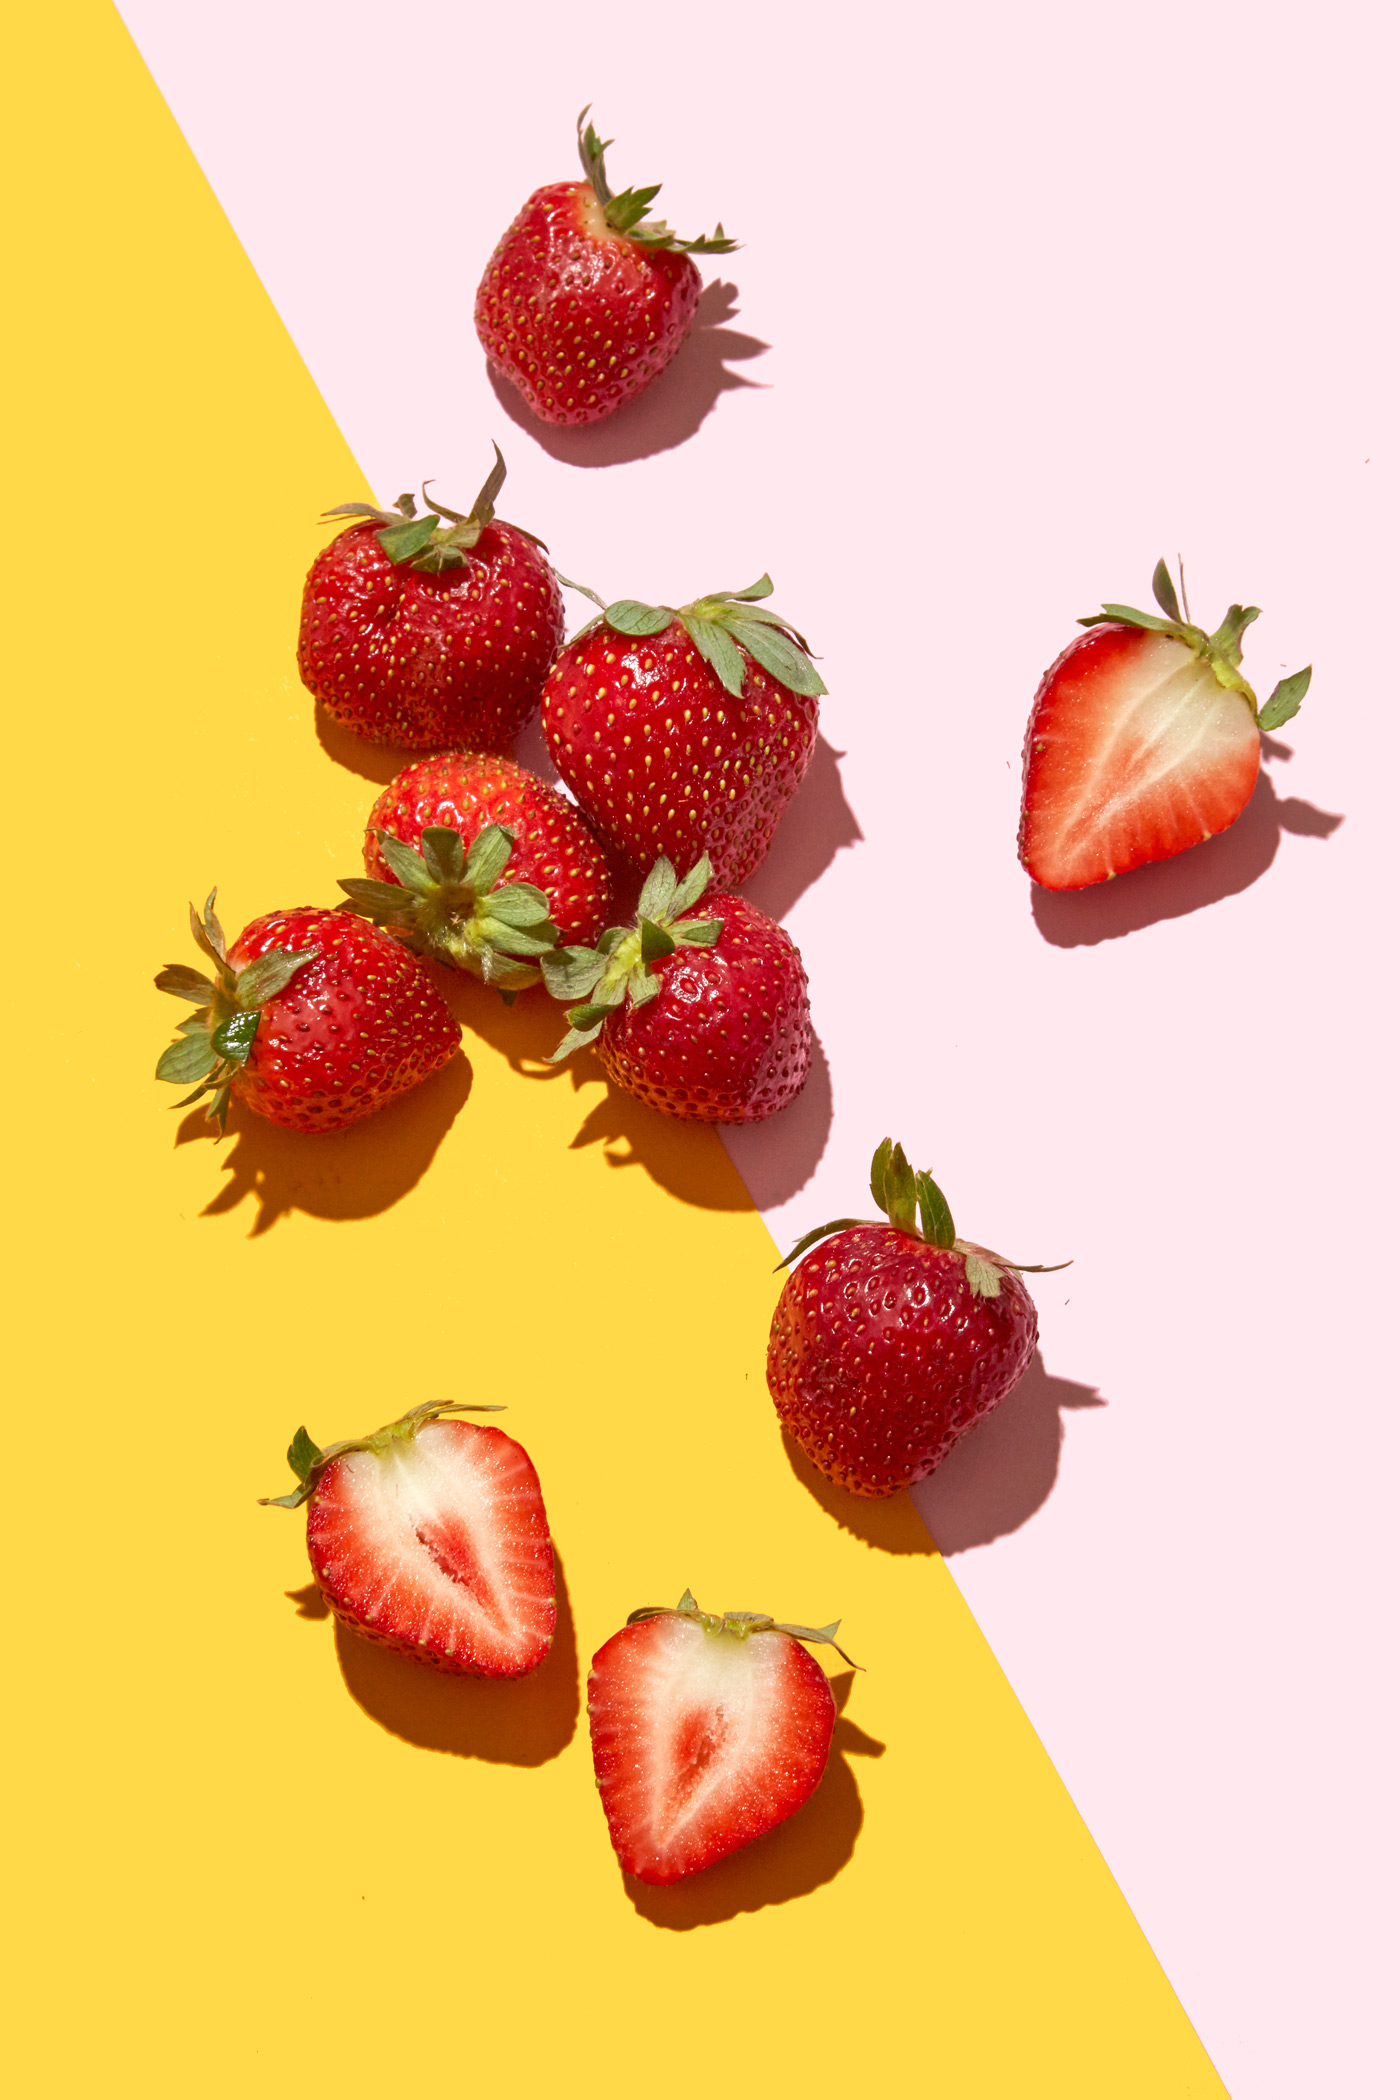 healthiest foods, health food, diet, nutrition, time.com stock, strawberries, berry